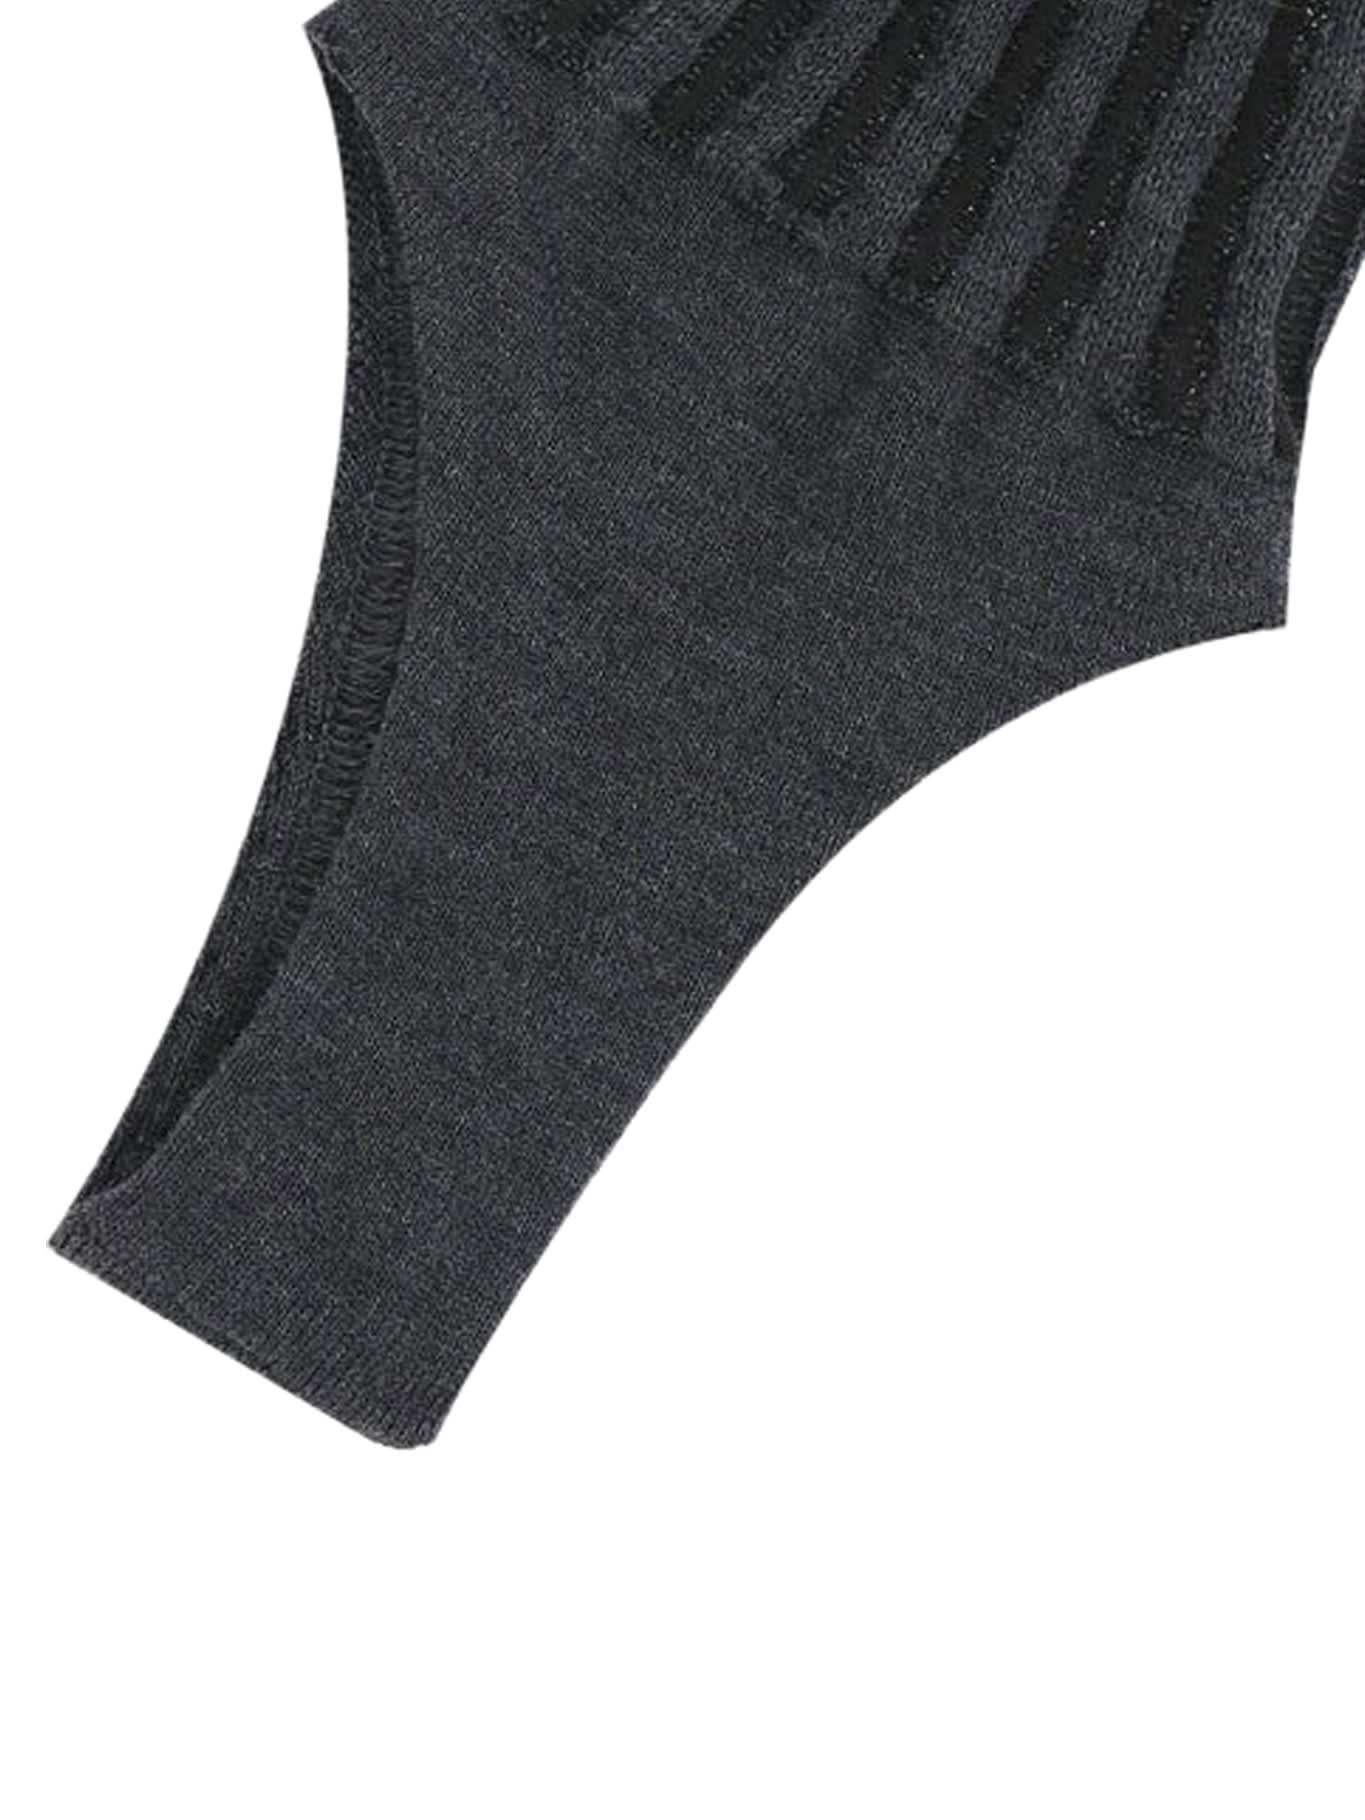 Shop Durazzi Milano Knitted Ribbed Stirrup Leg Warmer In Grey Melange Pale Yellow Stripes